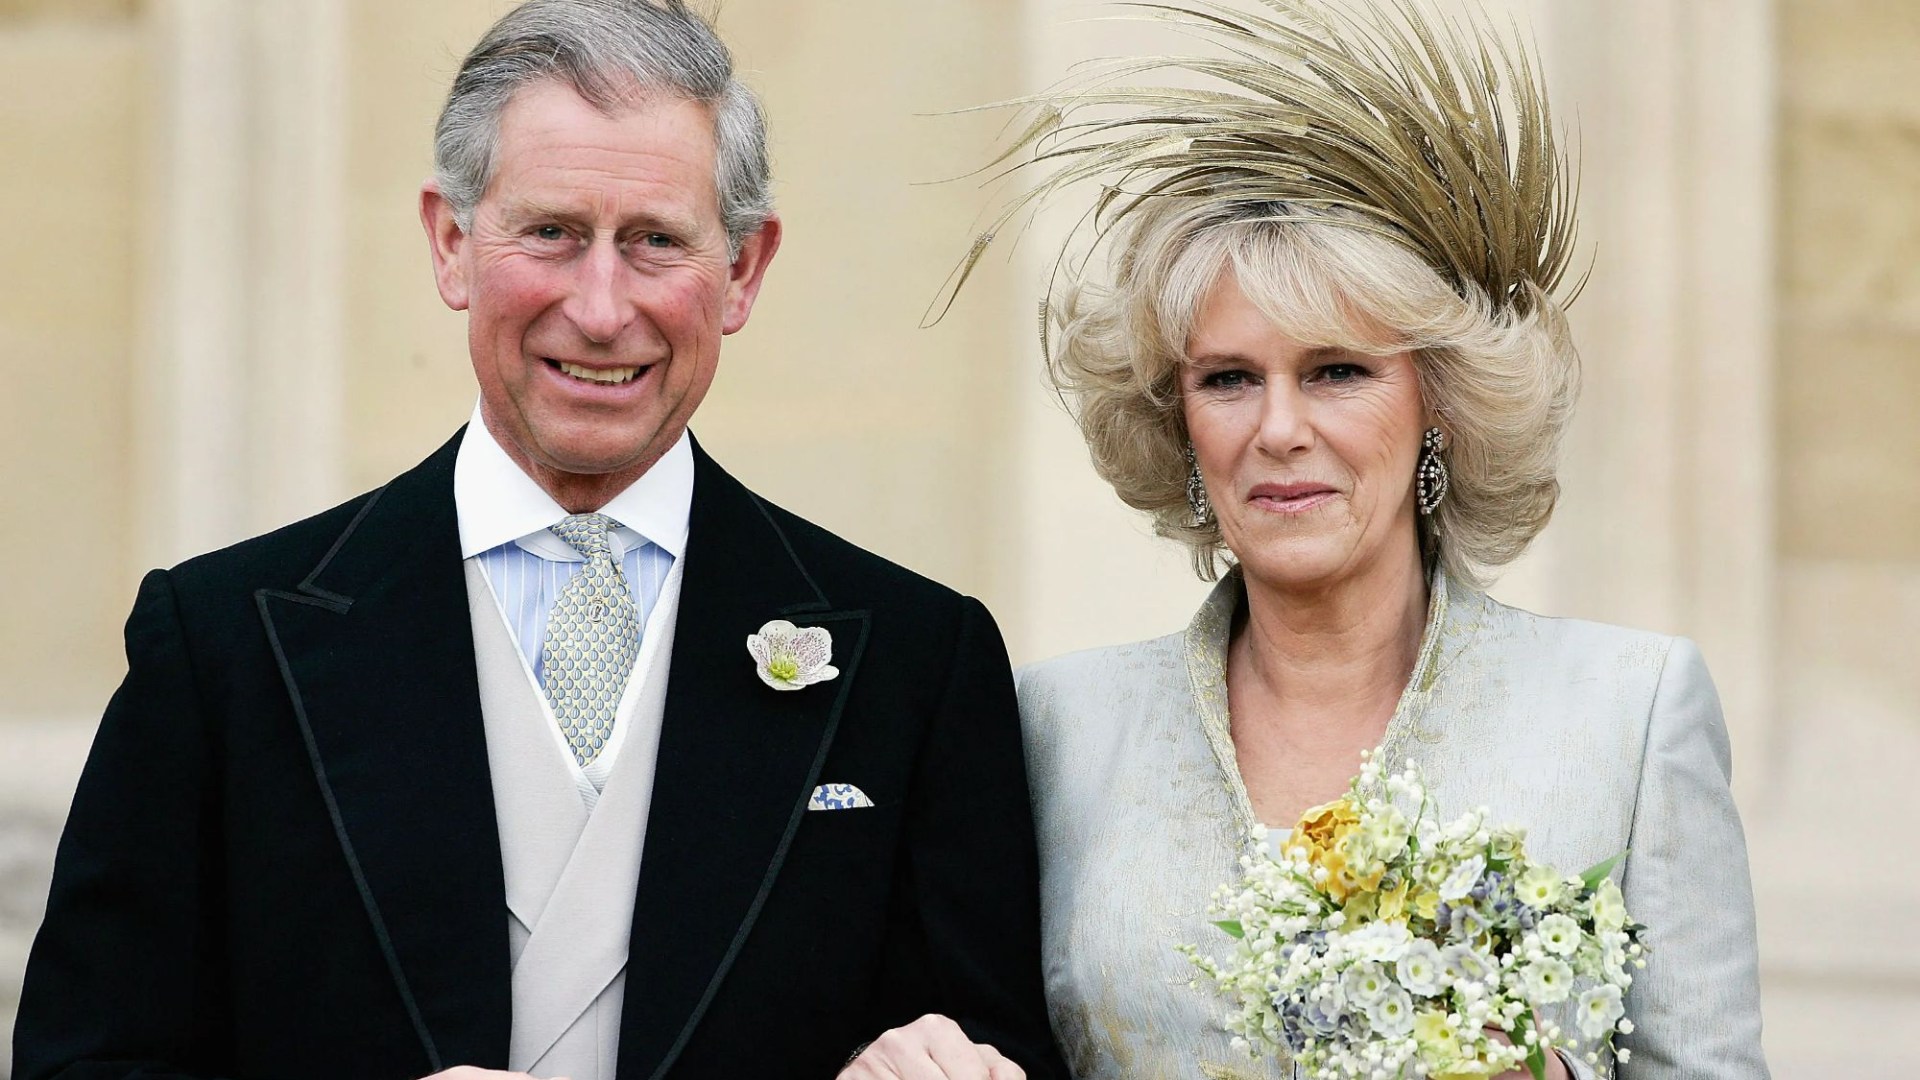 Clearest sign yet of Charles positive recovery as King to travel 500 miles for 19th wedding anniversary next week [Video]